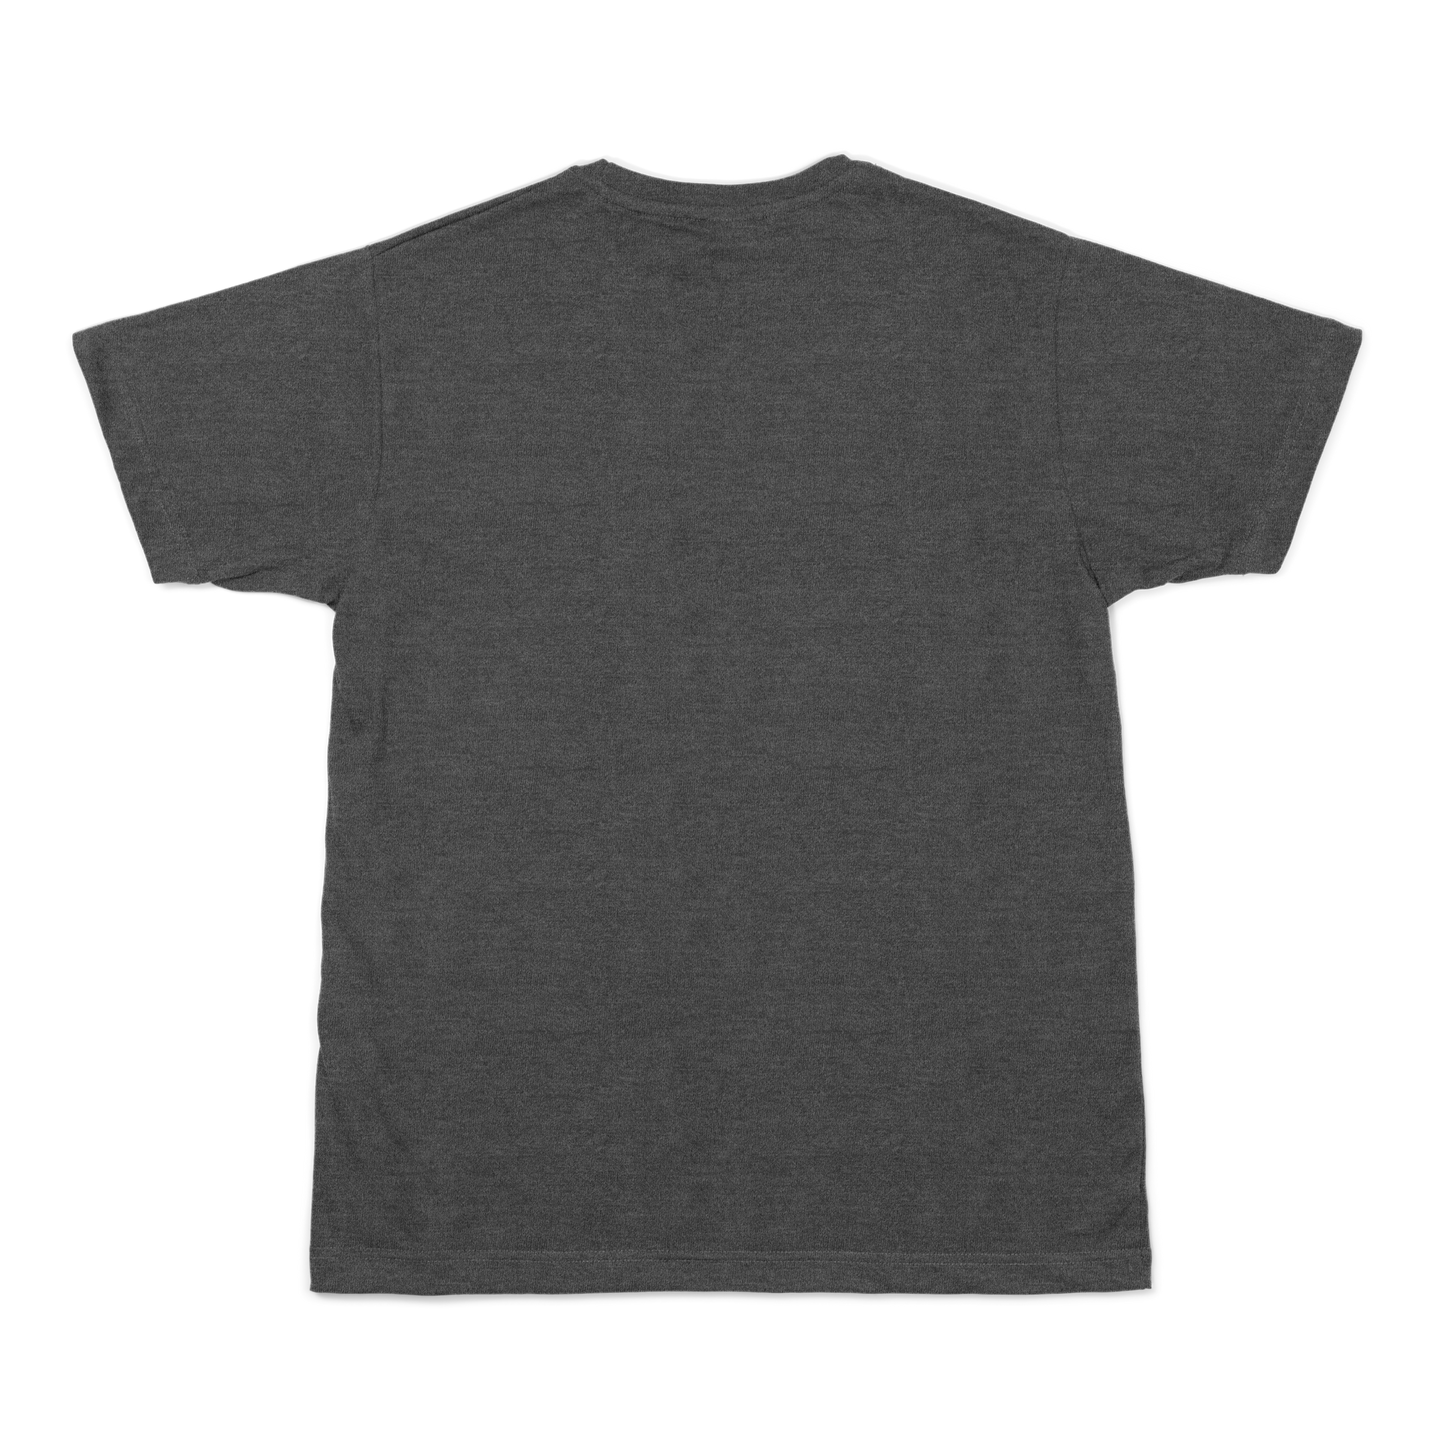 Relaxed Fit Hemp Tee - Charcoal Grey